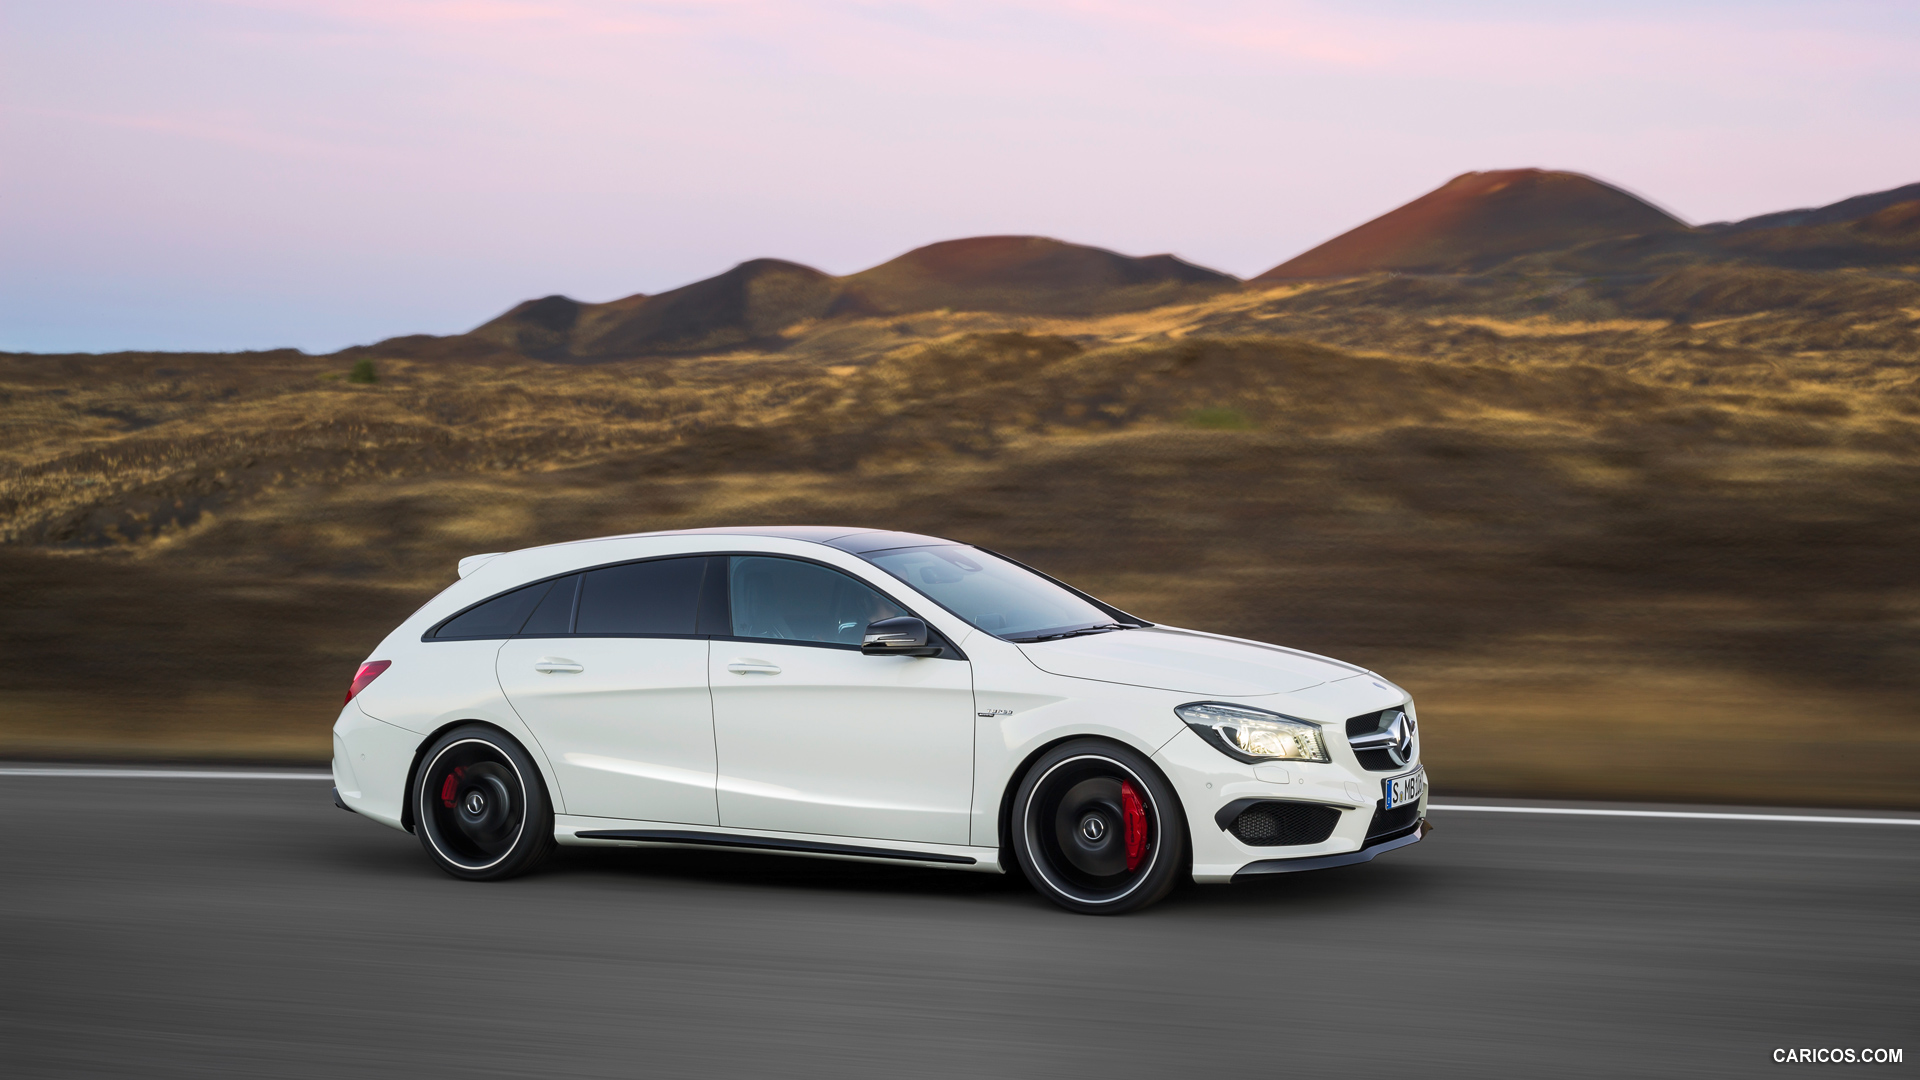 2015 Mercedes-Benz CLA 45 AMG Shooting Brake (Calcite White)  - Side, #2 of 70